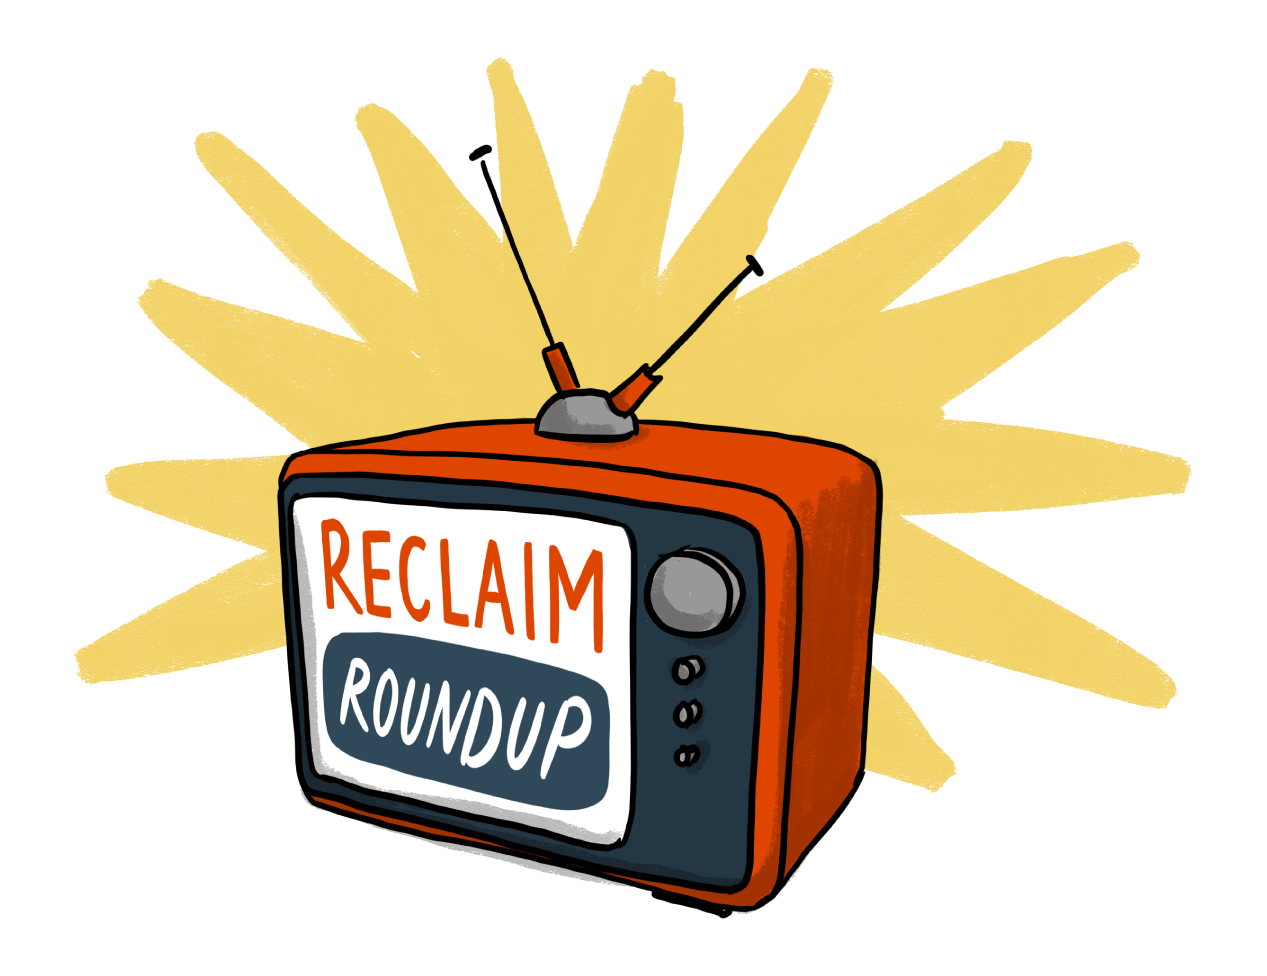 An old-fashioned TV with the words "Reclaim Roundup" on the front. The background is a yellow sun.